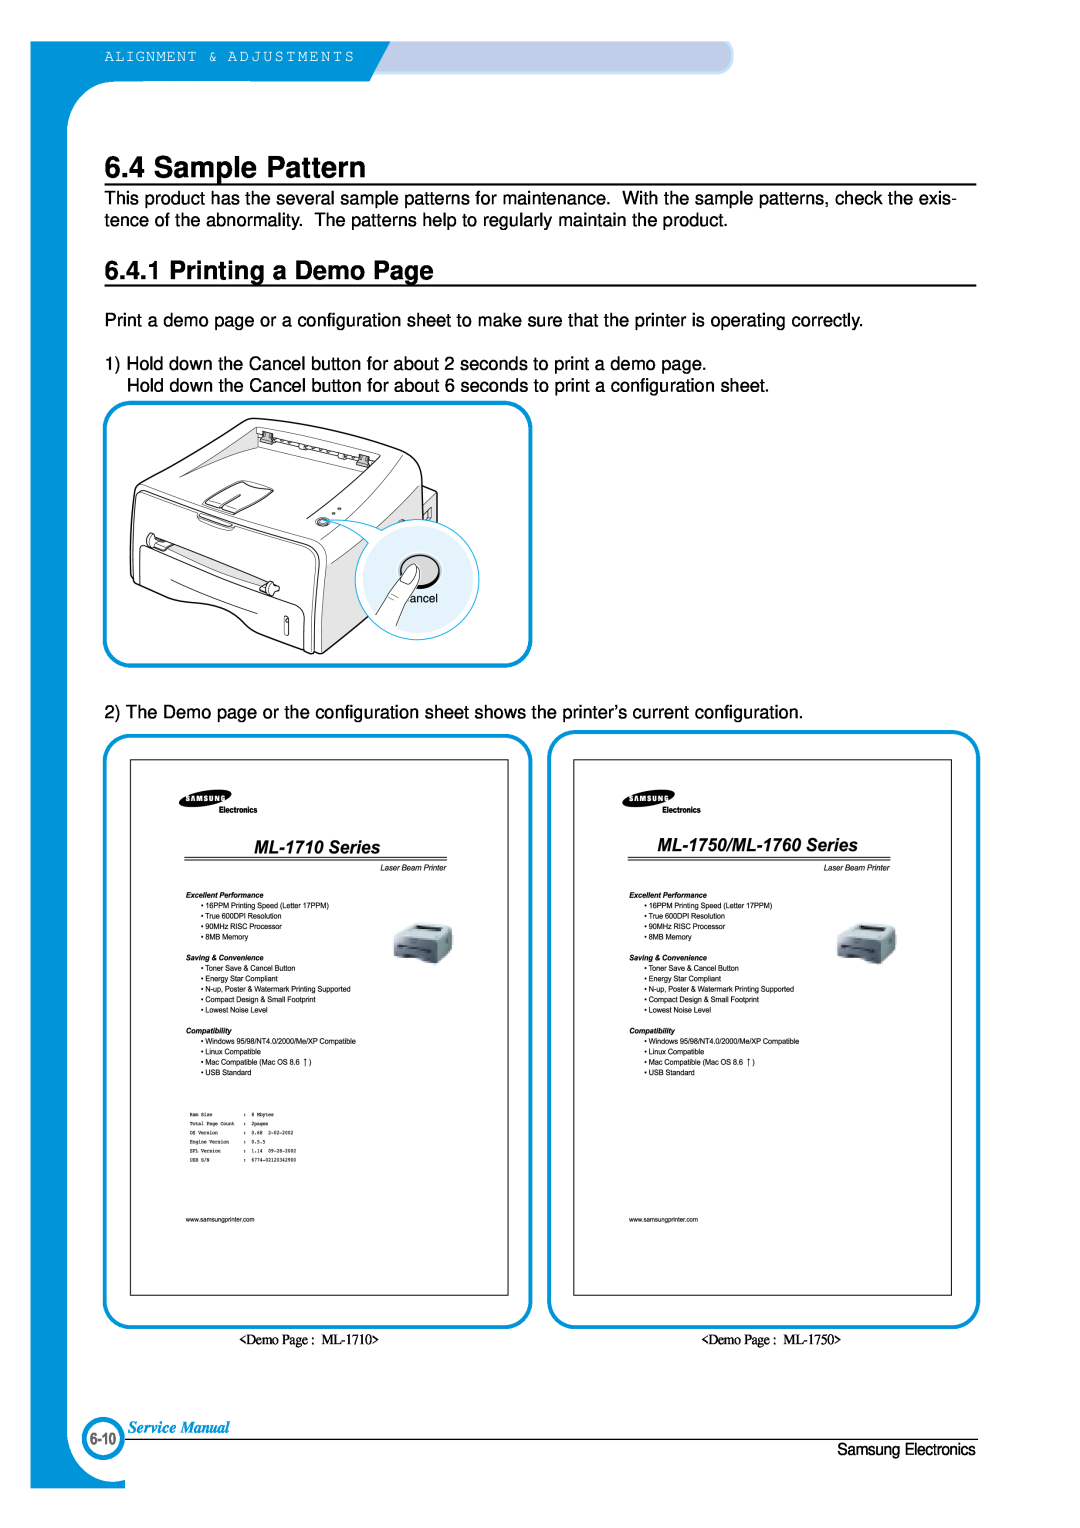 Samsung ML-1700 specifications Sample Pattern, Printing a Demo Page 